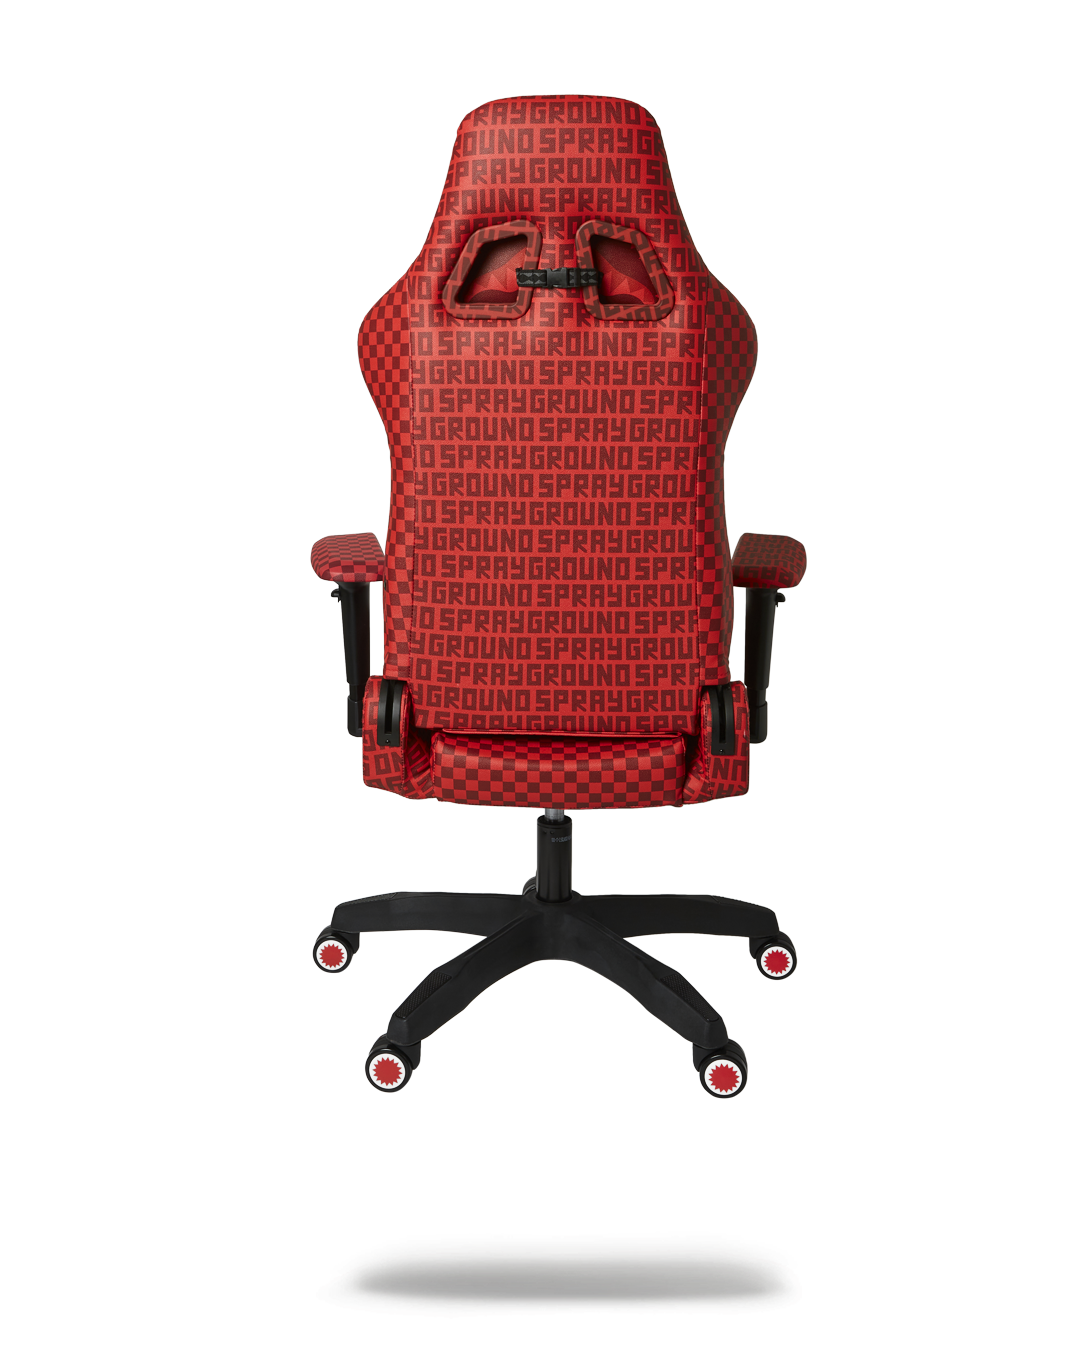 INFINITY RED GAMING CHAIR